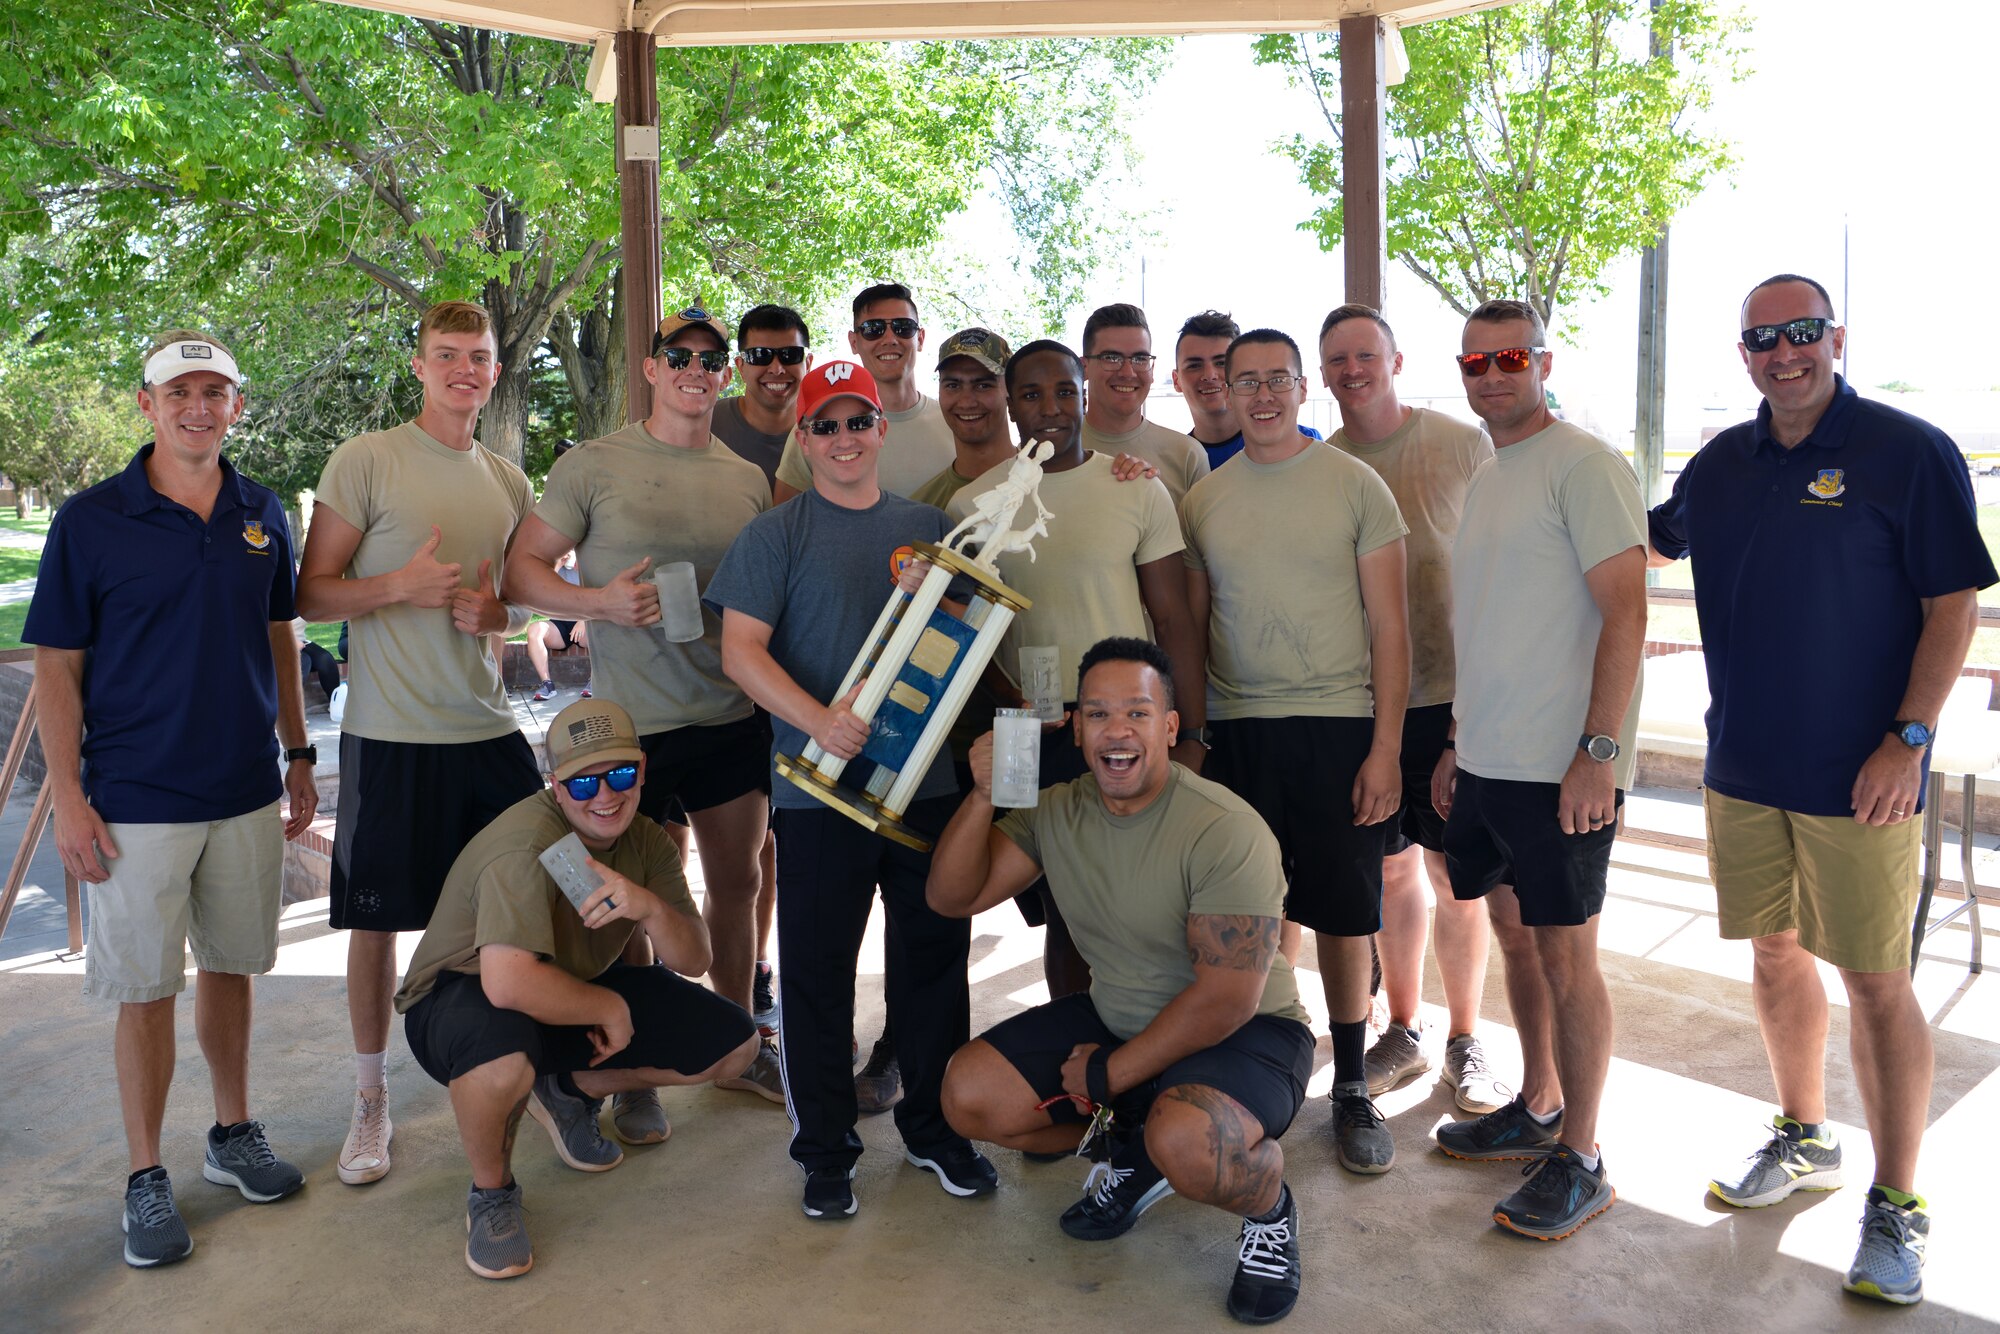 Members of the 58th Aircraft Maintenance Squadron pose for a group photo with 58th Special Operations Wing leadership after being presented the 2019 Wing Sports Day trophy at Kirtland Air Force Base, N.M., Sept. 27, 2019. The sports day included a competition between all the squadrons in the wing with top placements in every sport earning points for the unit. The 58th Aircraft Maintenance Squadron won the competition with almost double the points of the second place squadron.